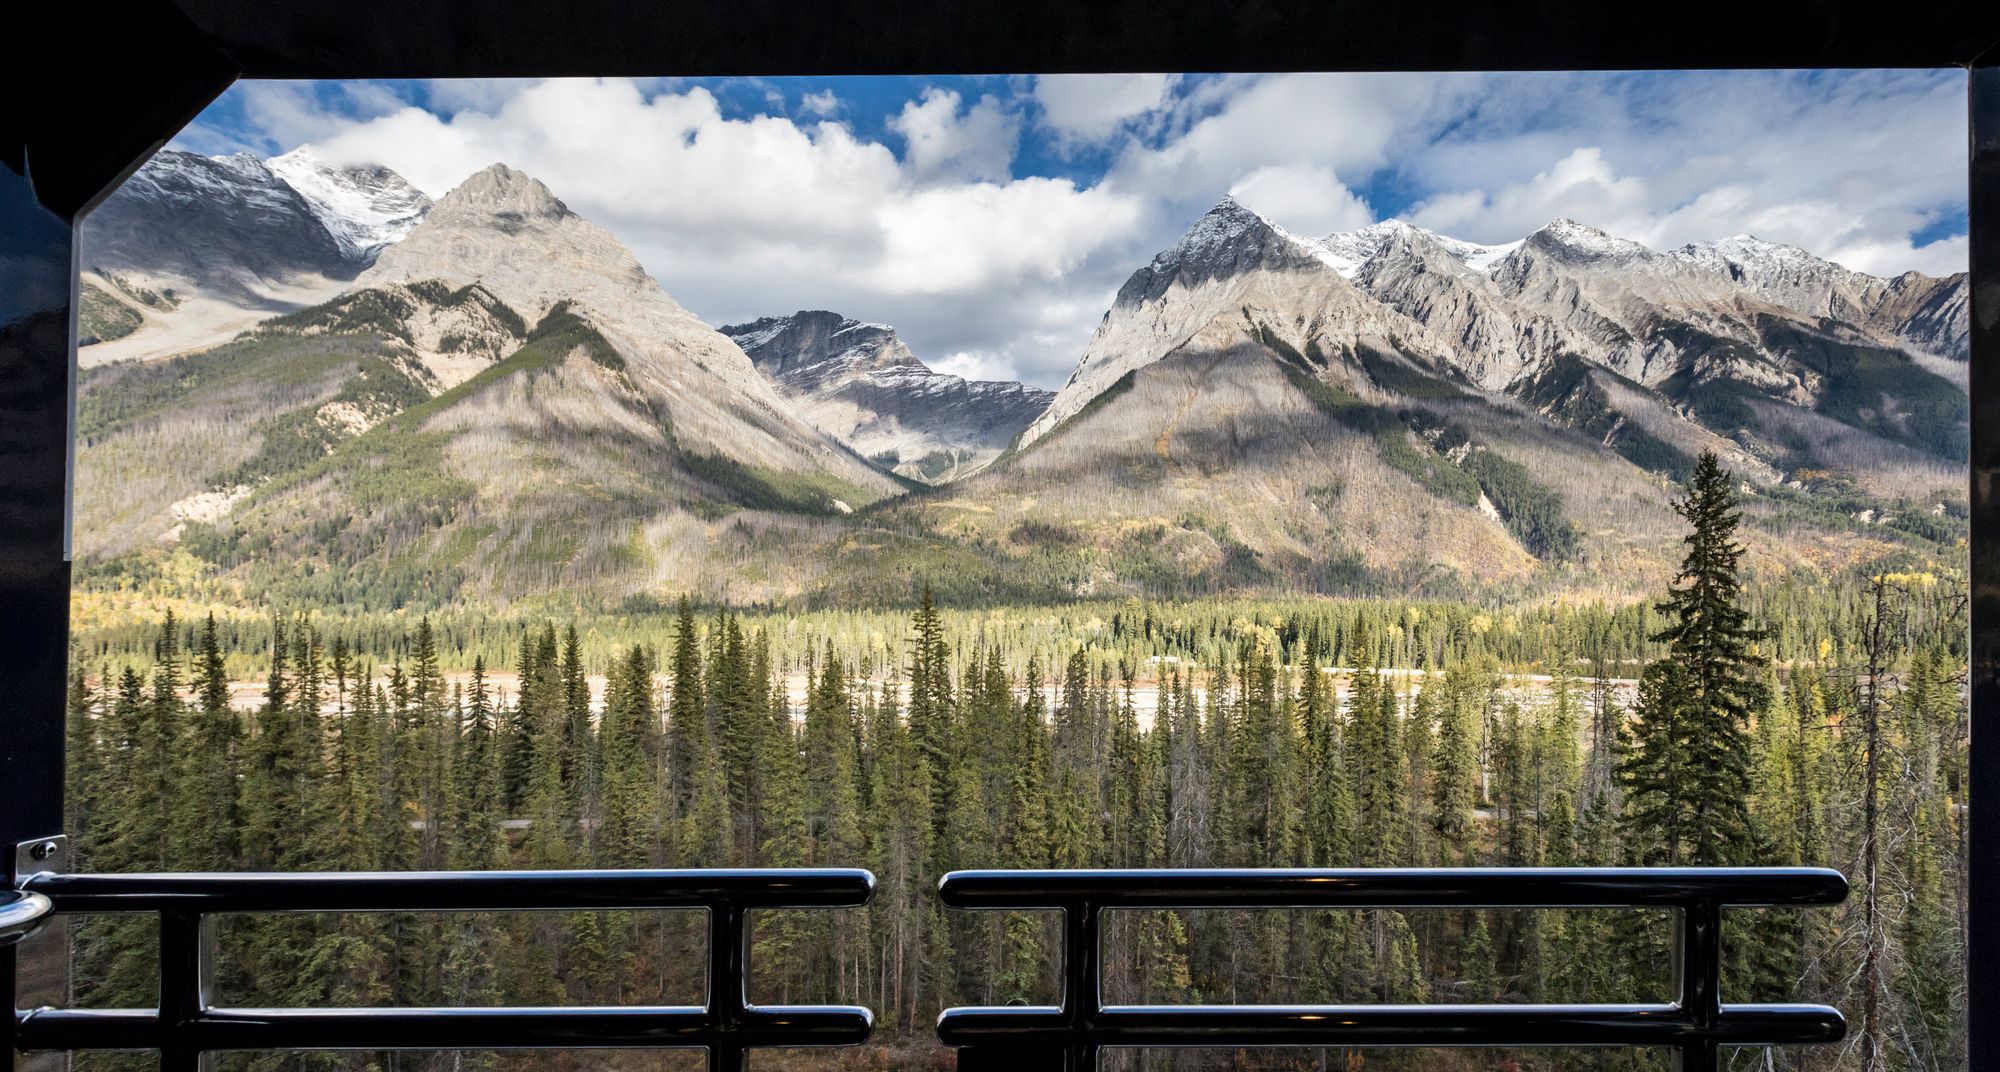 Choose between four rail routes through the Canadian Rockies